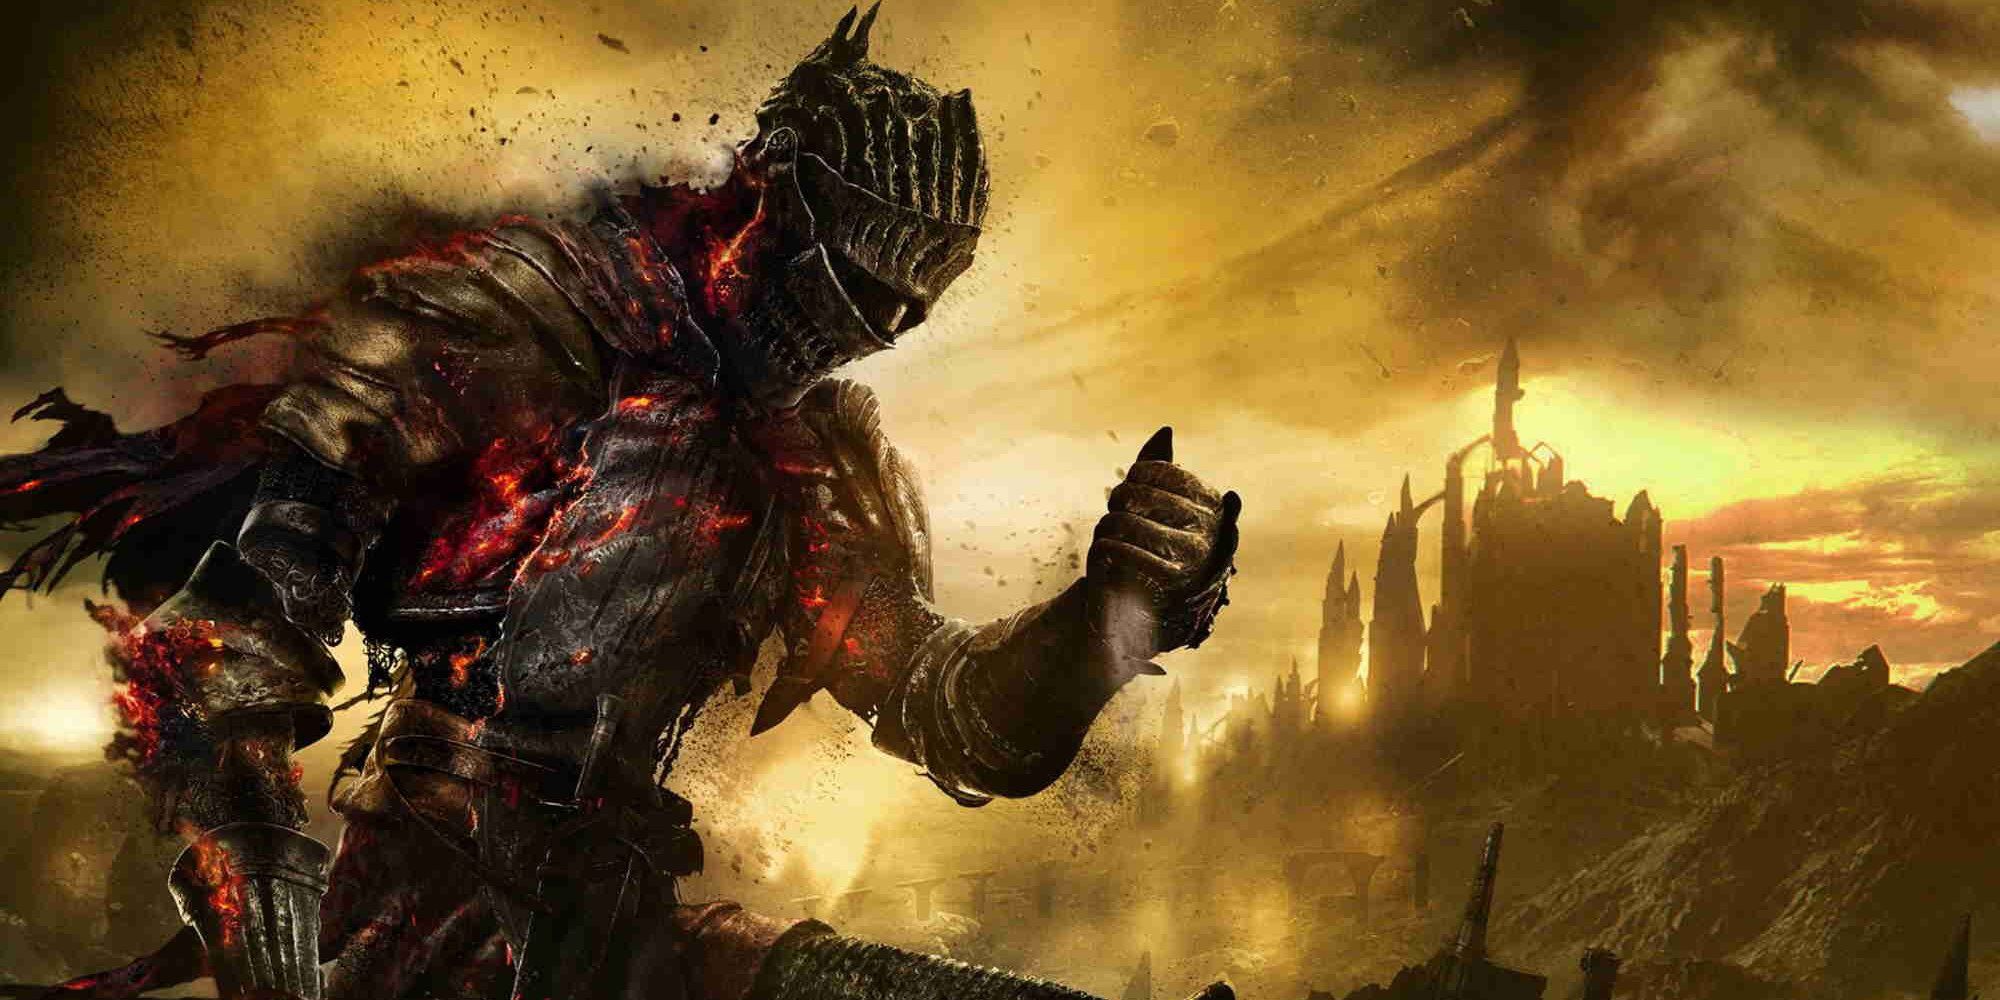 Cover Art for Dark Souls 3 showing a player character covered in embers holding ash that falls through their fingers with a large castle in the distance